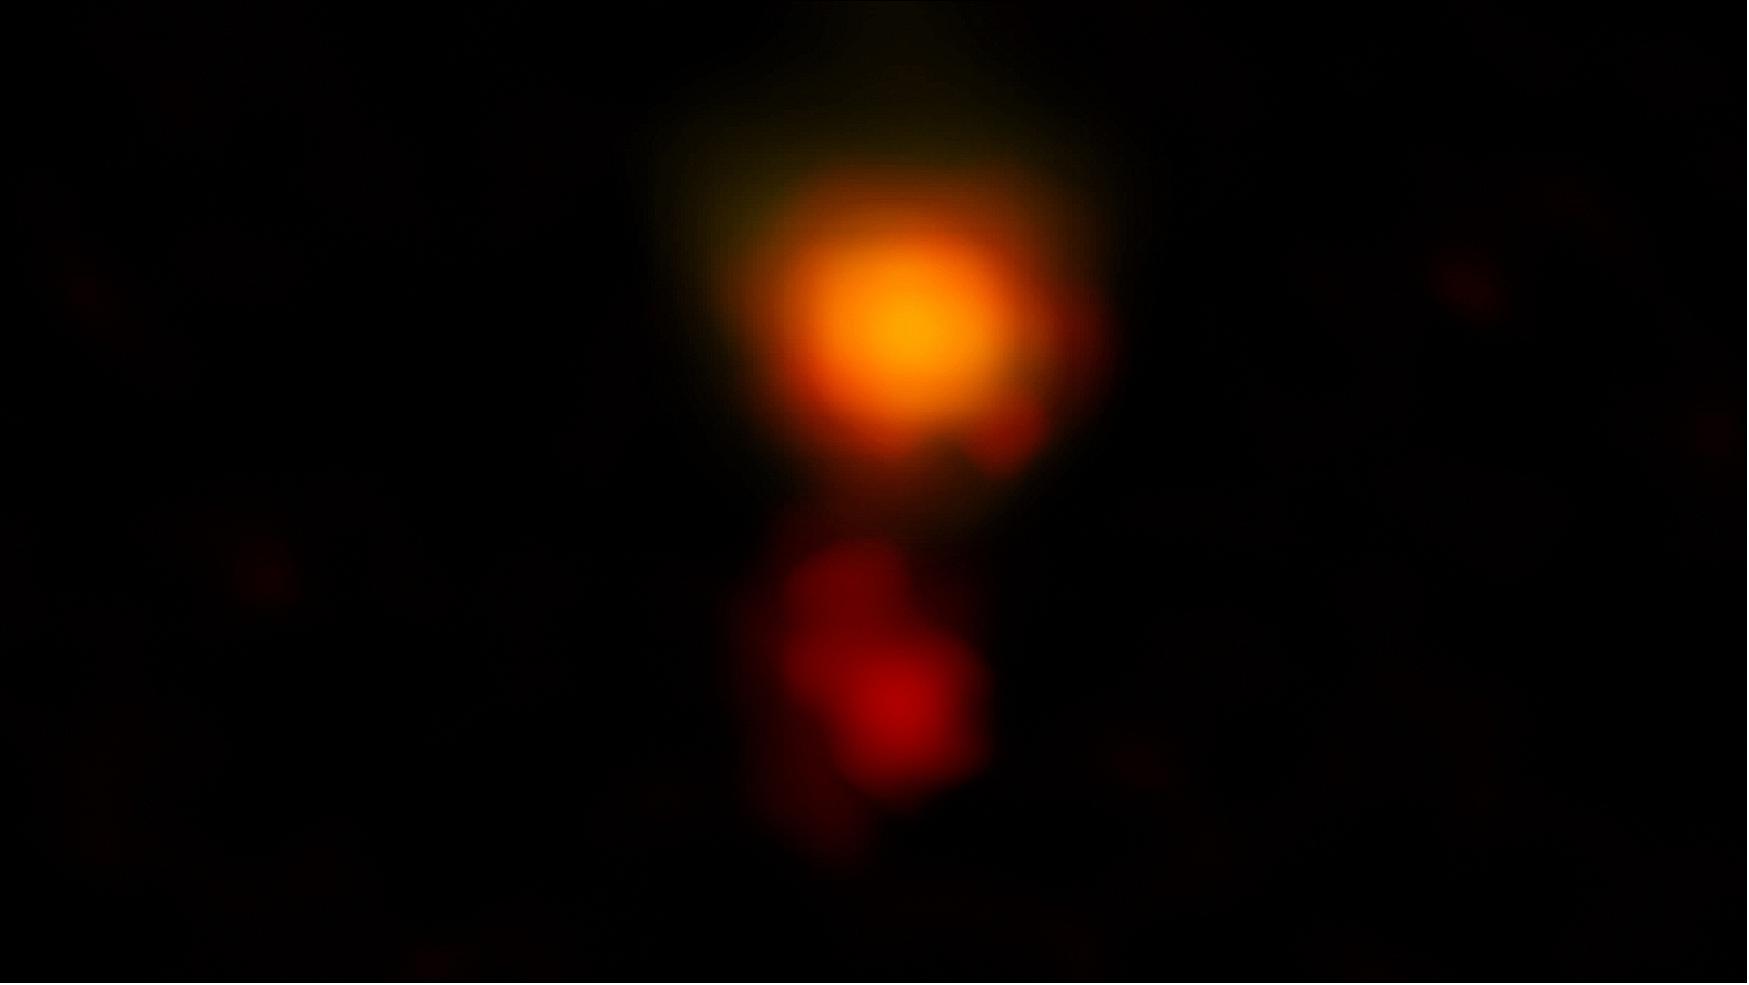 Figure 78: ALMA radio image of the dusty star-forming galaxy called MAMBO-9. The galaxy consists of two parts, and it is in the process of merging (image credit: ALMA (ESO/NAOJ/NRAO), C. M. Casey et al.; NRAO/AUI/NSF, B. Saxton)